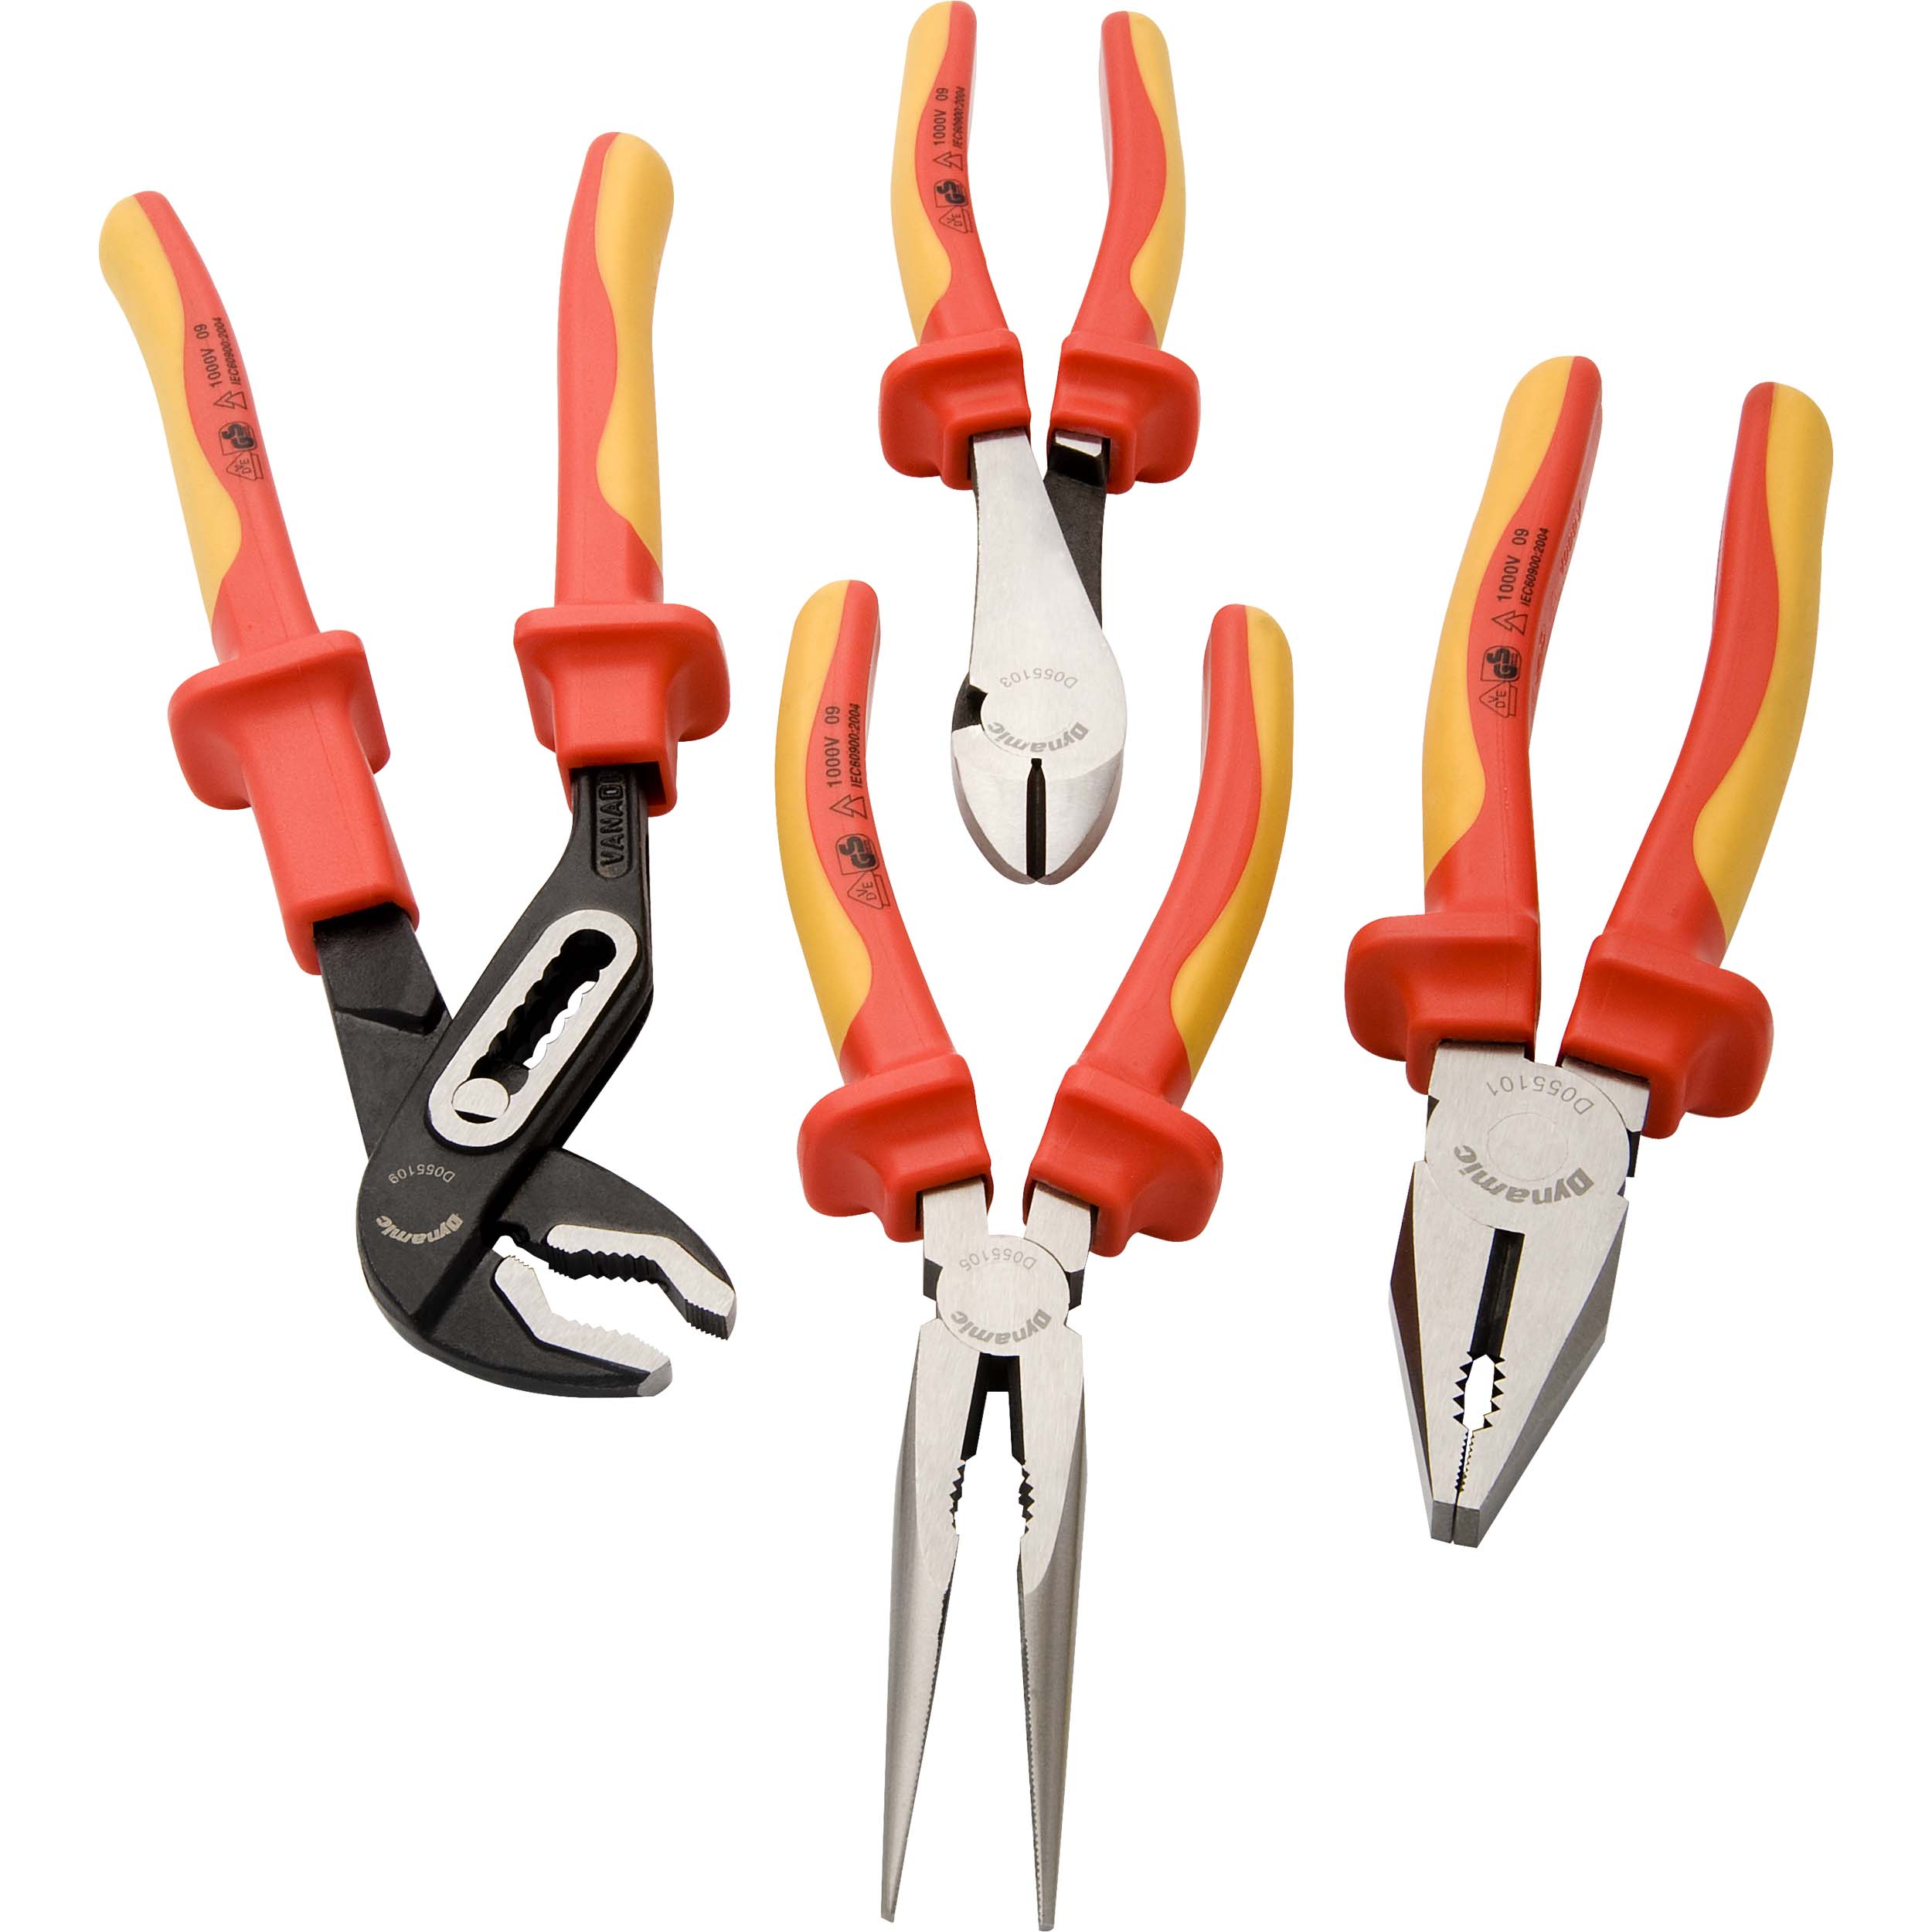 Tools 4pc Plier Set With Insulated Handles